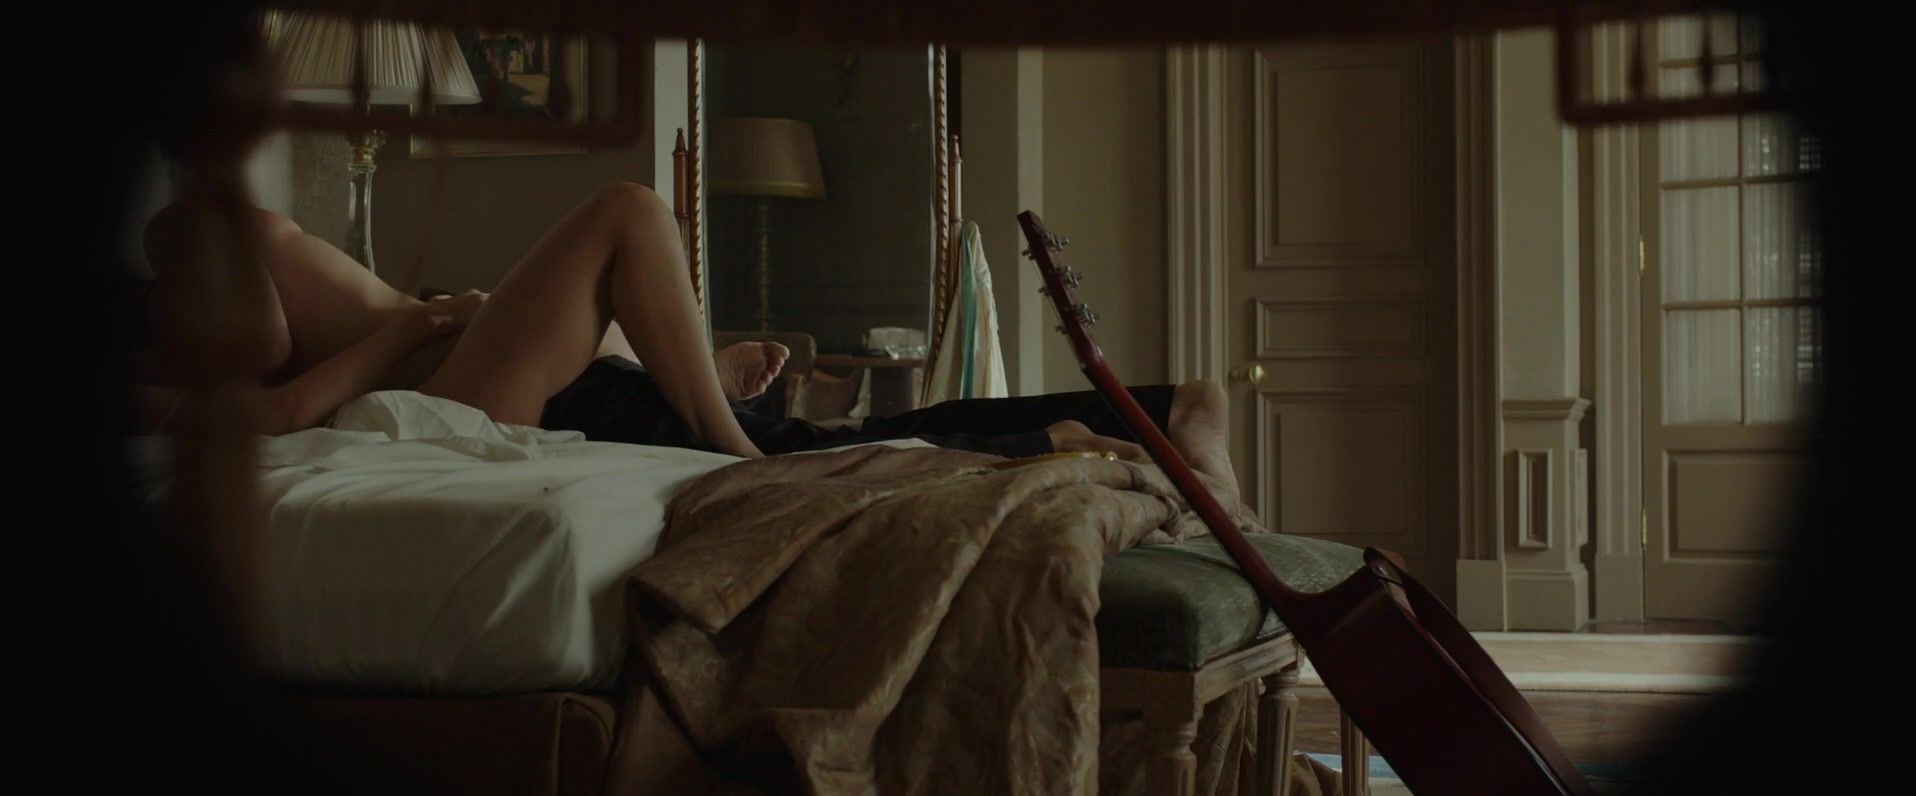 DreamMovies Hot scene with nude actress Melanie Laurent of the movie "By The Sea" Blow Job Movies - 1